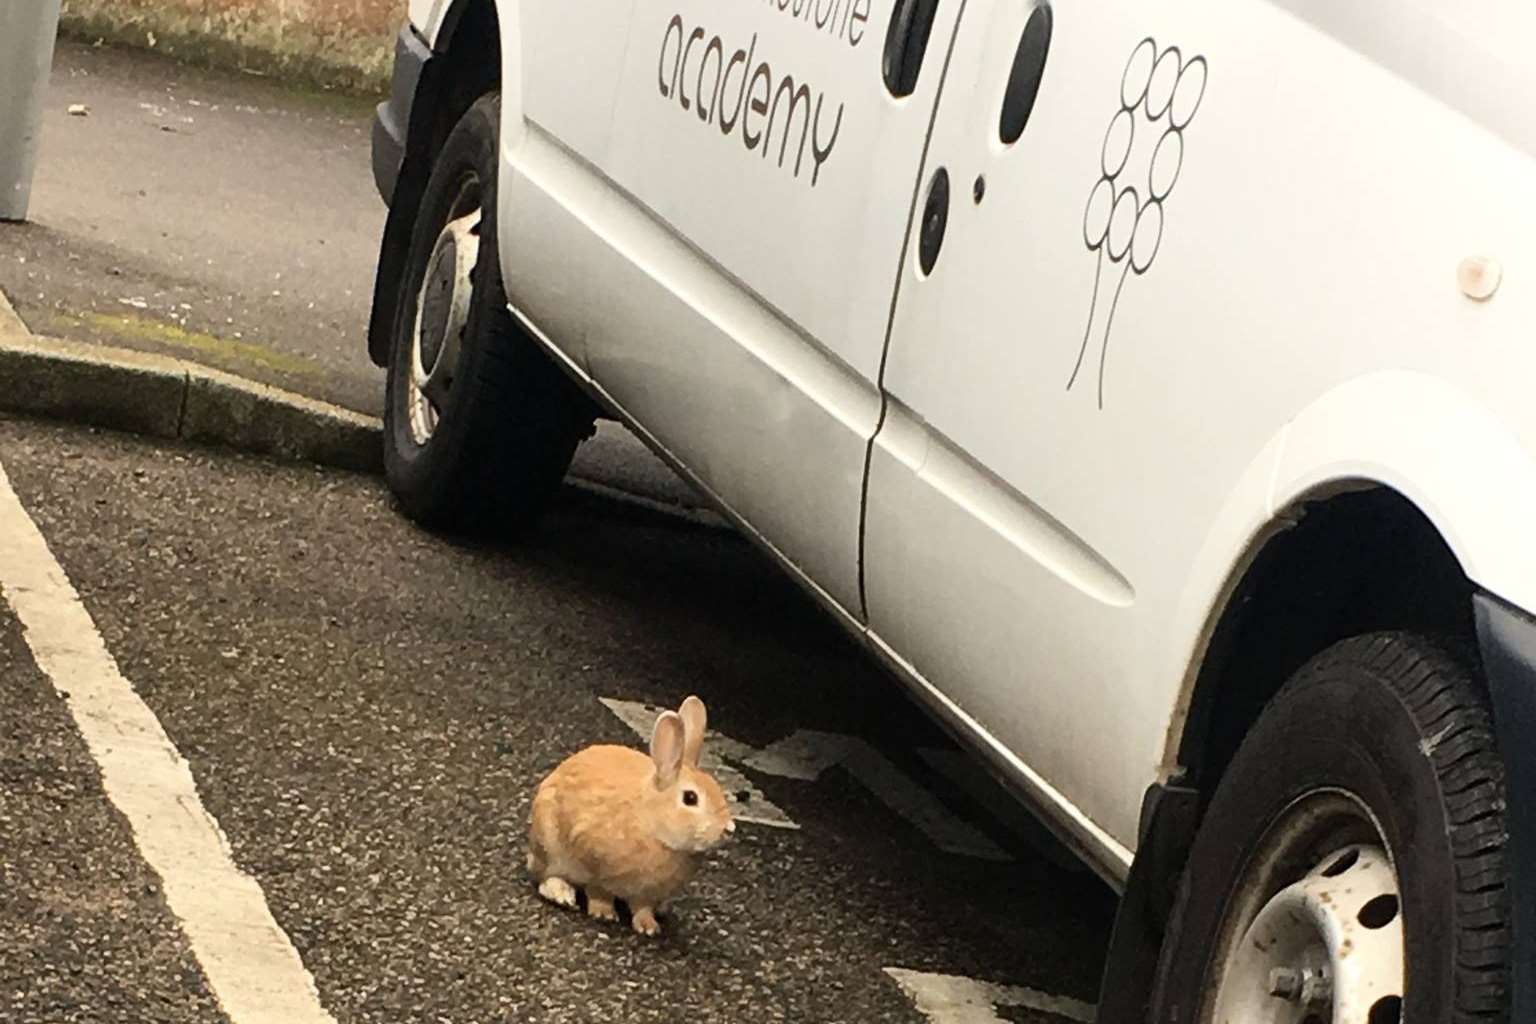 School staff are bidding to track down the owners of the missing rabbit. Picture: Folkestone Academy